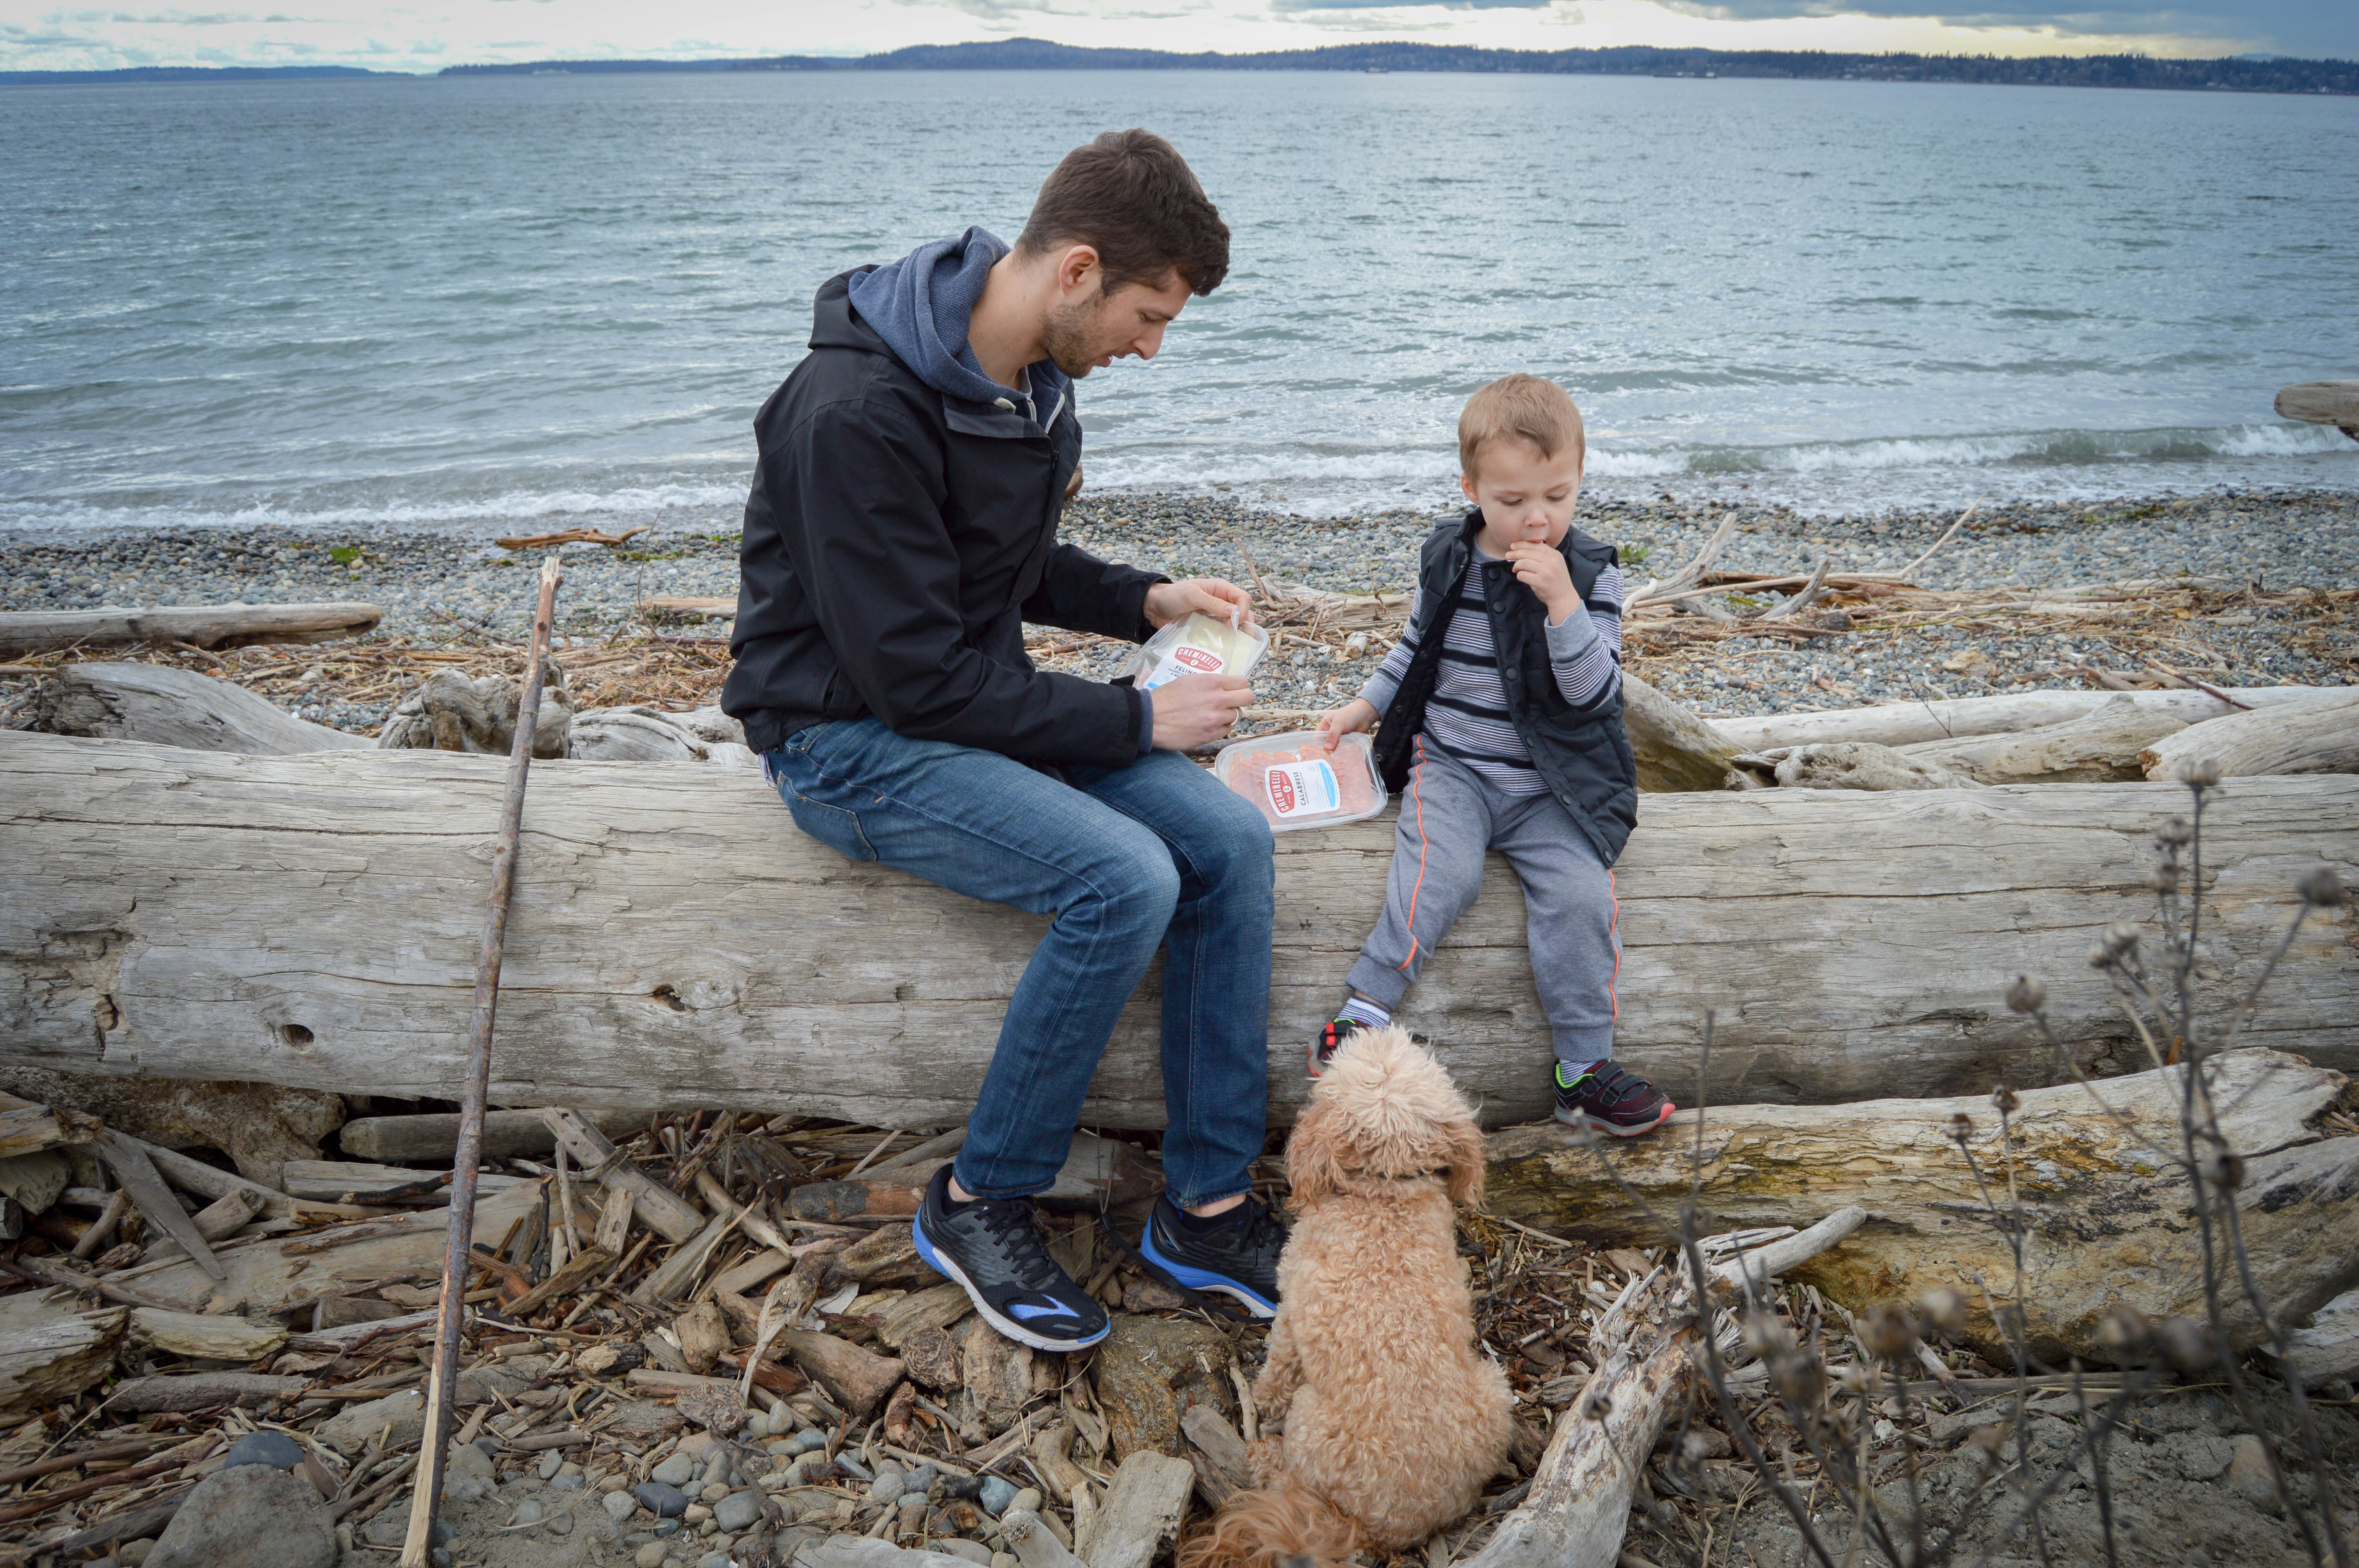 Our family's adventure through Discovery Park in Seattle, WA. Walking trail that twists through the lush, mossy trees; driftwood beaches, an old lighthouse, and stunning views of the Puget Sound water; and refueling with our protein-packed Creminelli snack trays.